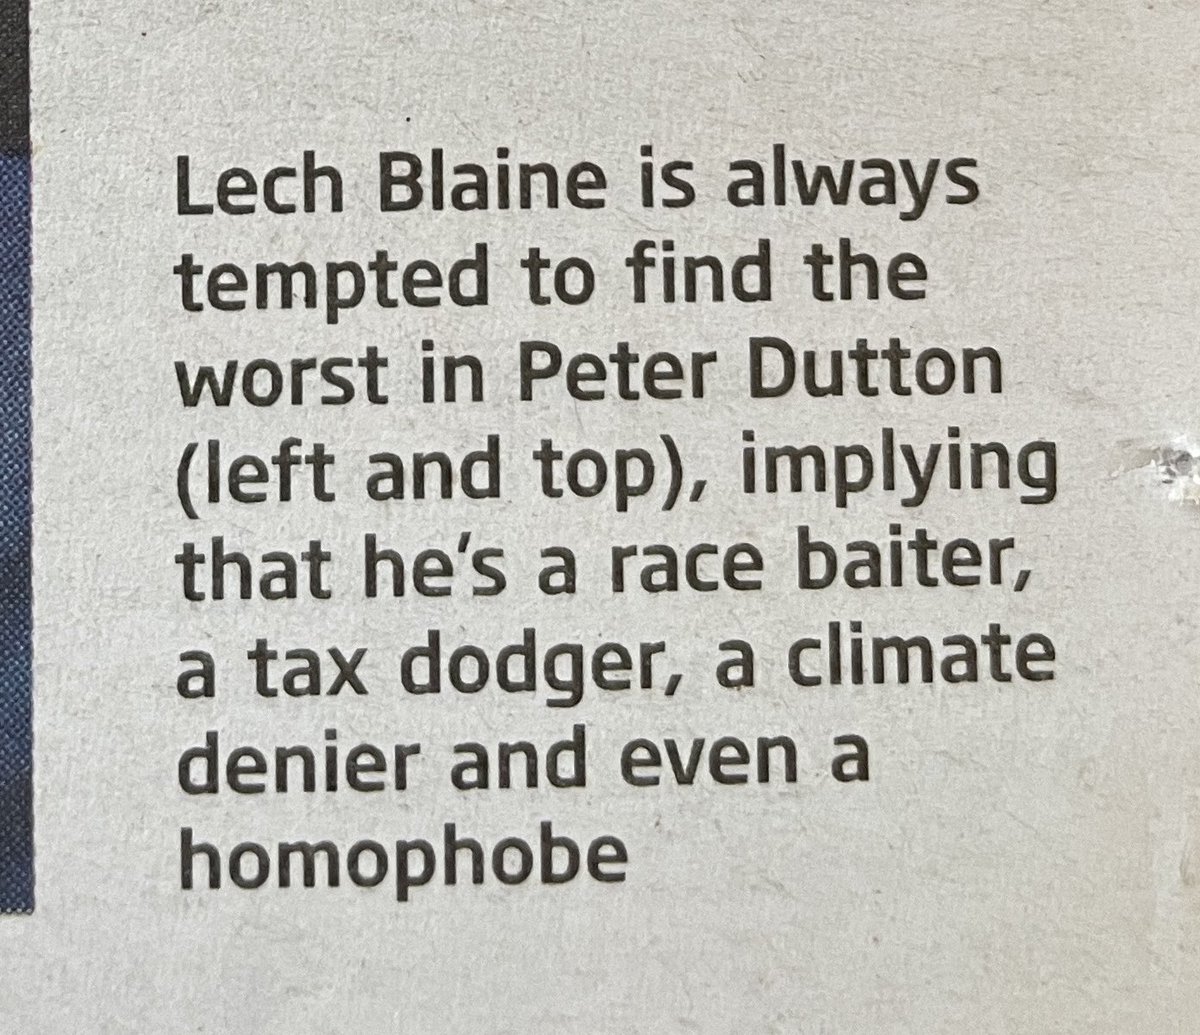 Timothy Lynch review of Lech Blaine’s #QuarterlyEssay ‘Bad Cop’… Can’t see the problem with Blaine’s assessment tbh. African gangs anyone?